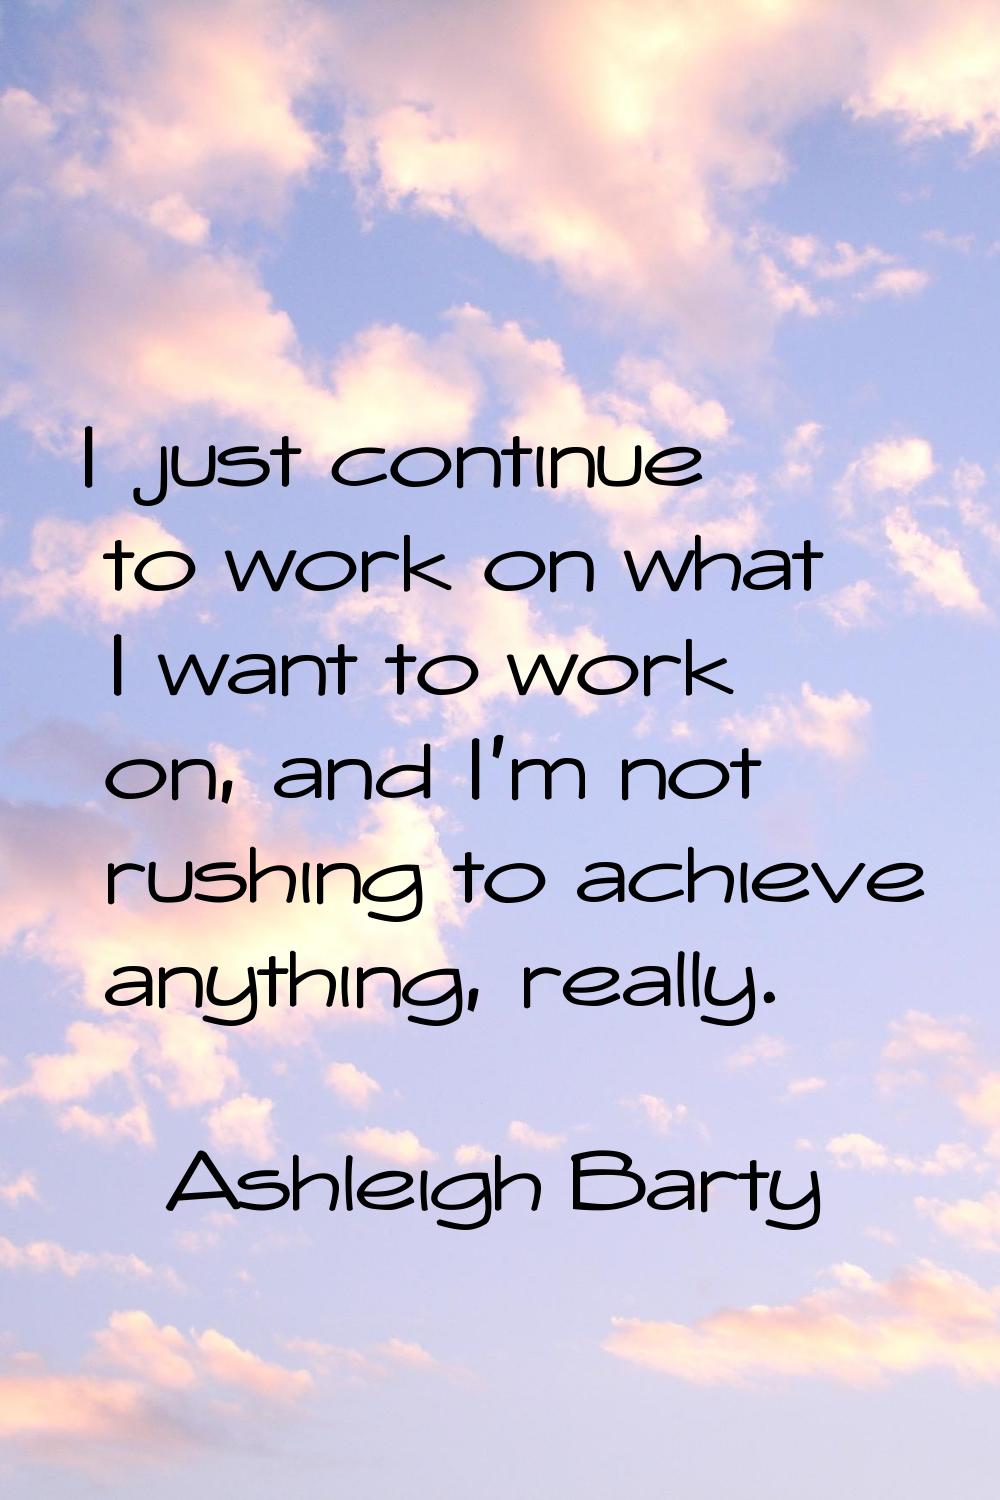 I just continue to work on what I want to work on, and I'm not rushing to achieve anything, really.